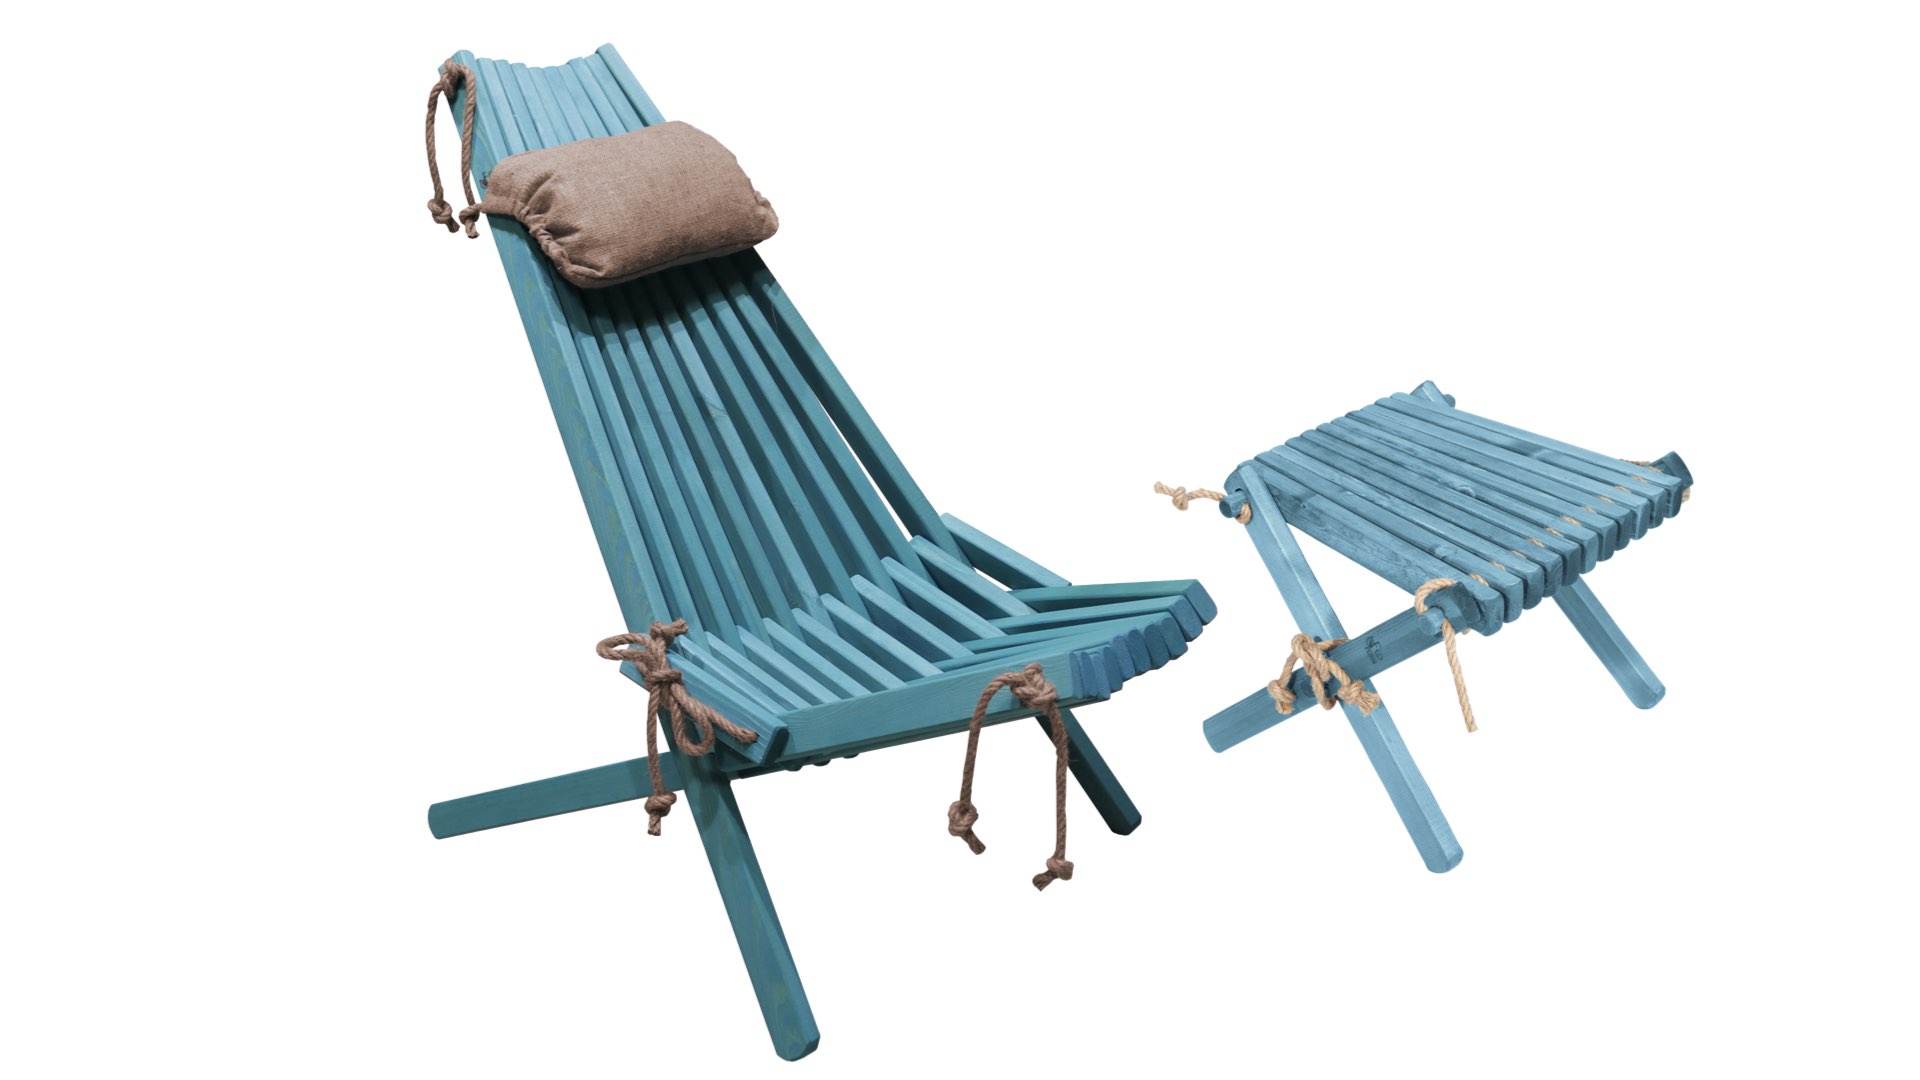 1 Chilienne Eco avec coussin + 1 Repose-Pied Pin - Turquoise